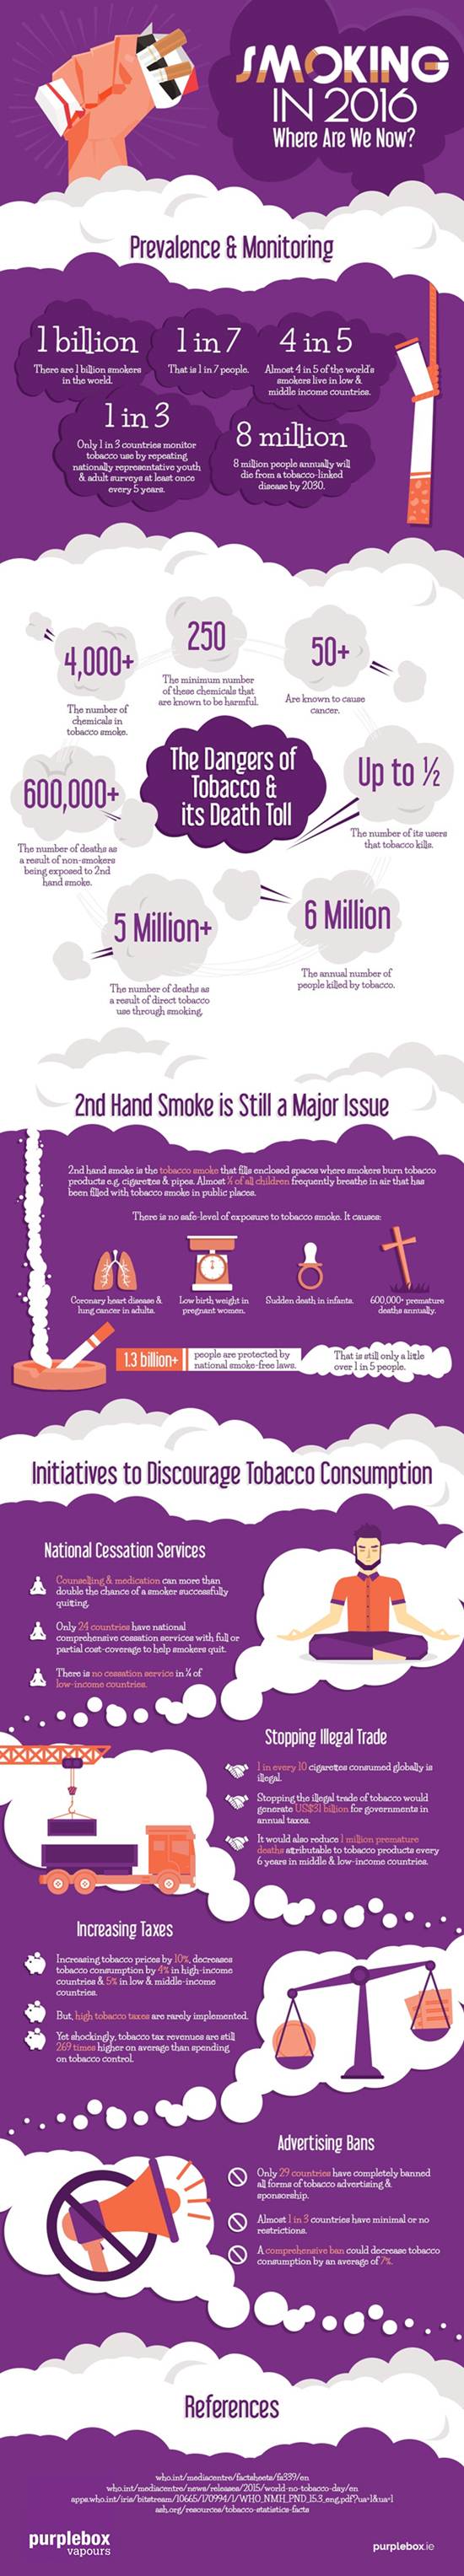 Infographic-Smoking in 2016, Where Are We Now